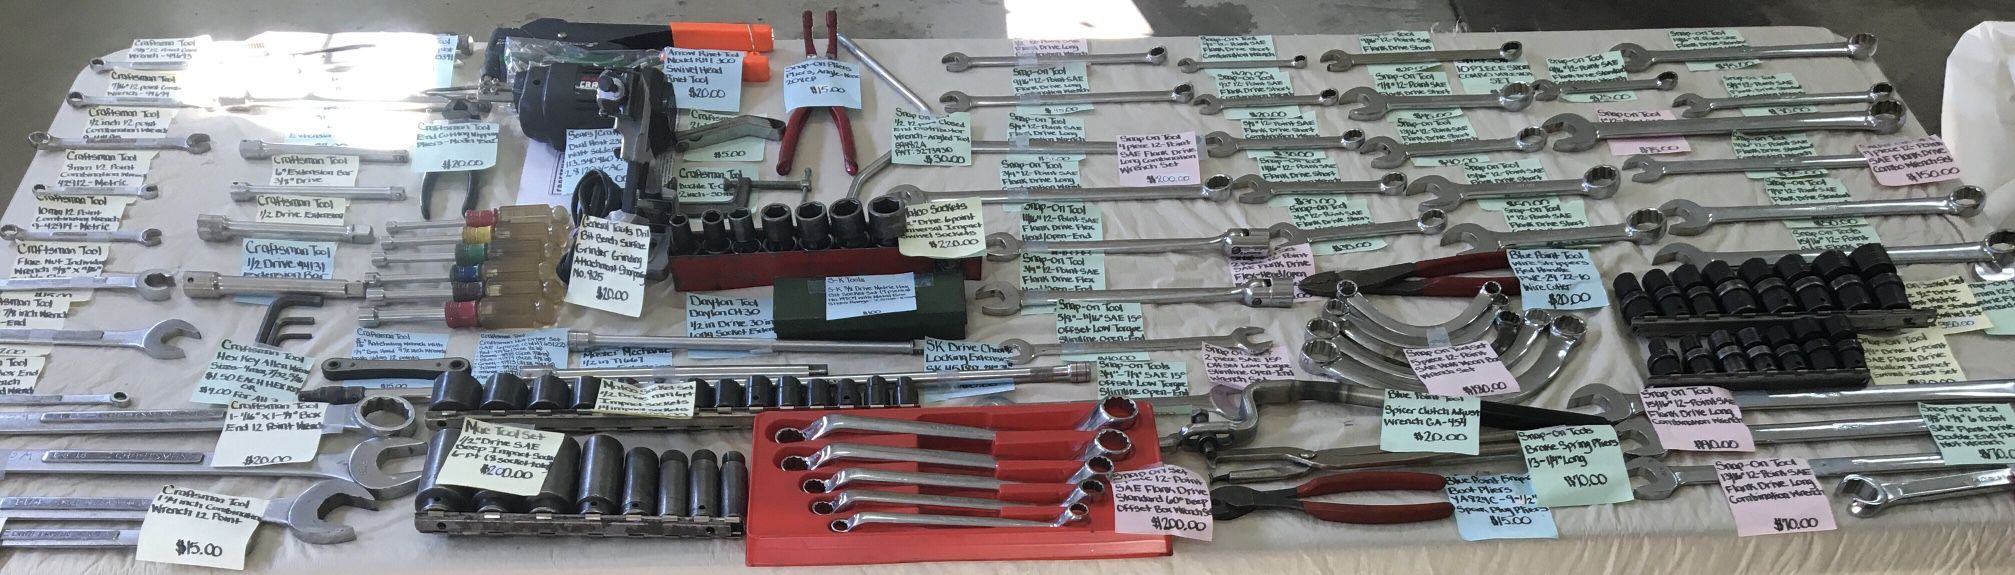 TOOL SALE- PRIVATE OWNER (PERSONAL TOOLS) 